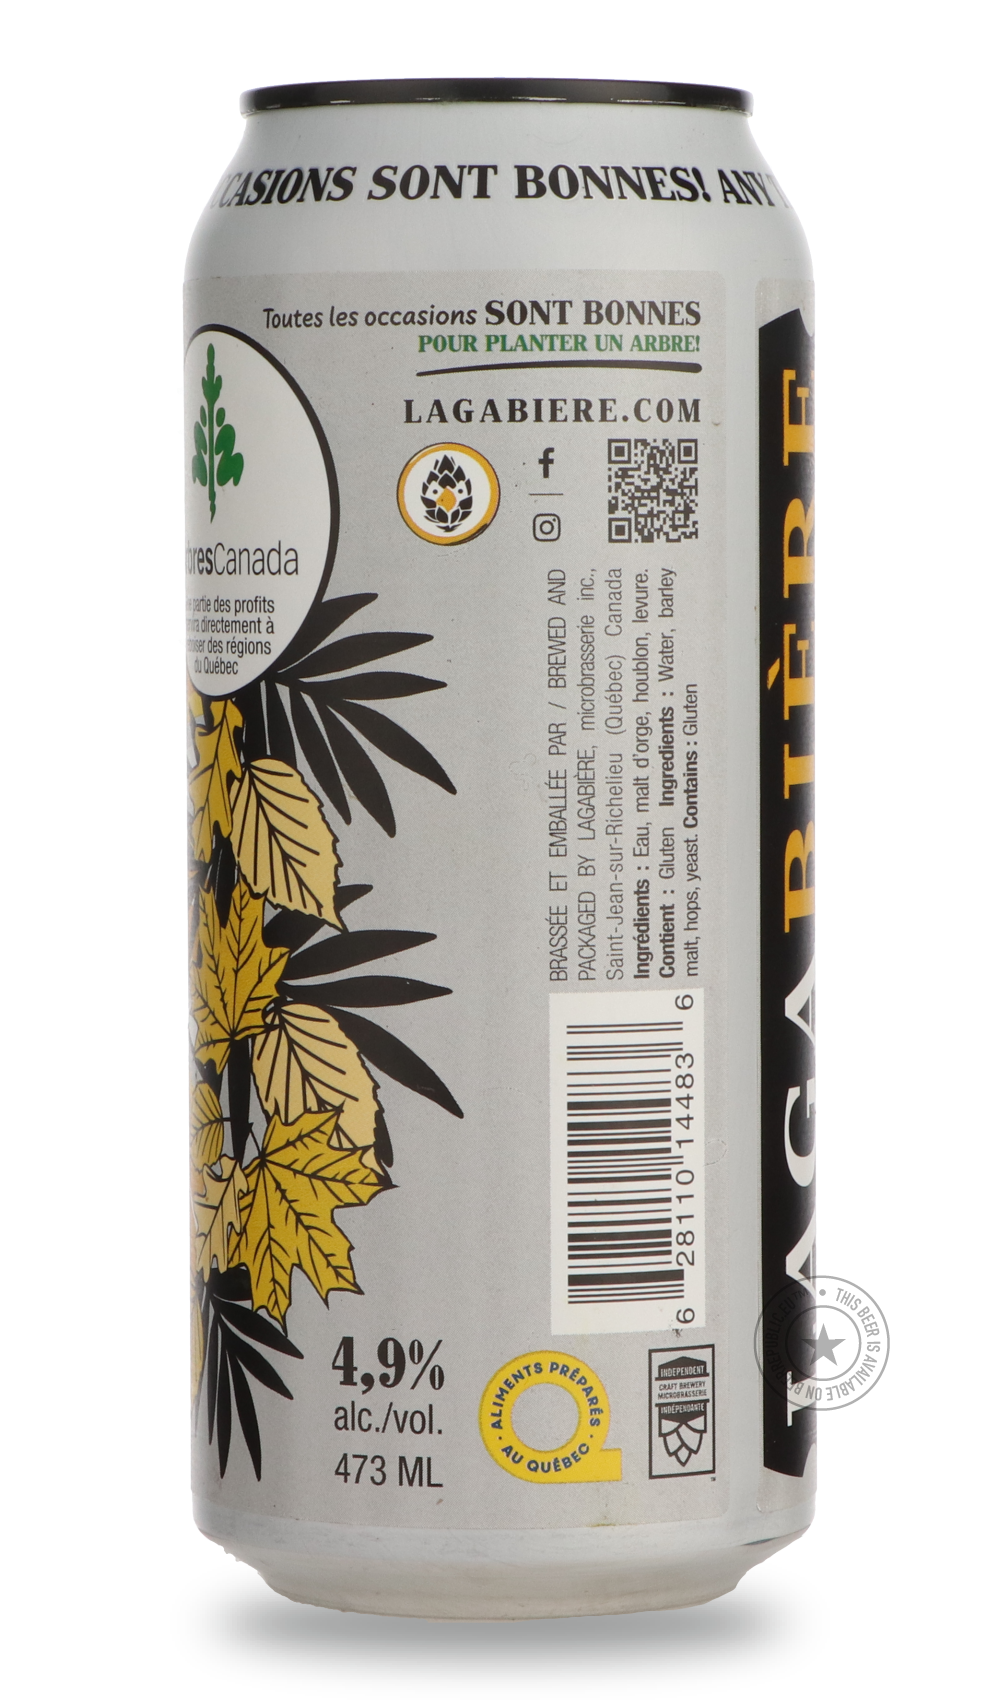 -Lagabière- LagaBlonde-Pale- Only @ Beer Republic - The best online beer store for American & Canadian craft beer - Buy beer online from the USA and Canada - Bier online kopen - Amerikaans bier kopen - Craft beer store - Craft beer kopen - Amerikanisch bier kaufen - Bier online kaufen - Acheter biere online - IPA - Stout - Porter - New England IPA - Hazy IPA - Imperial Stout - Barrel Aged - Barrel Aged Imperial Stout - Brown - Dark beer - Blond - Blonde - Pilsner - Lager - Wheat - Weizen - Amber - Barley Wi